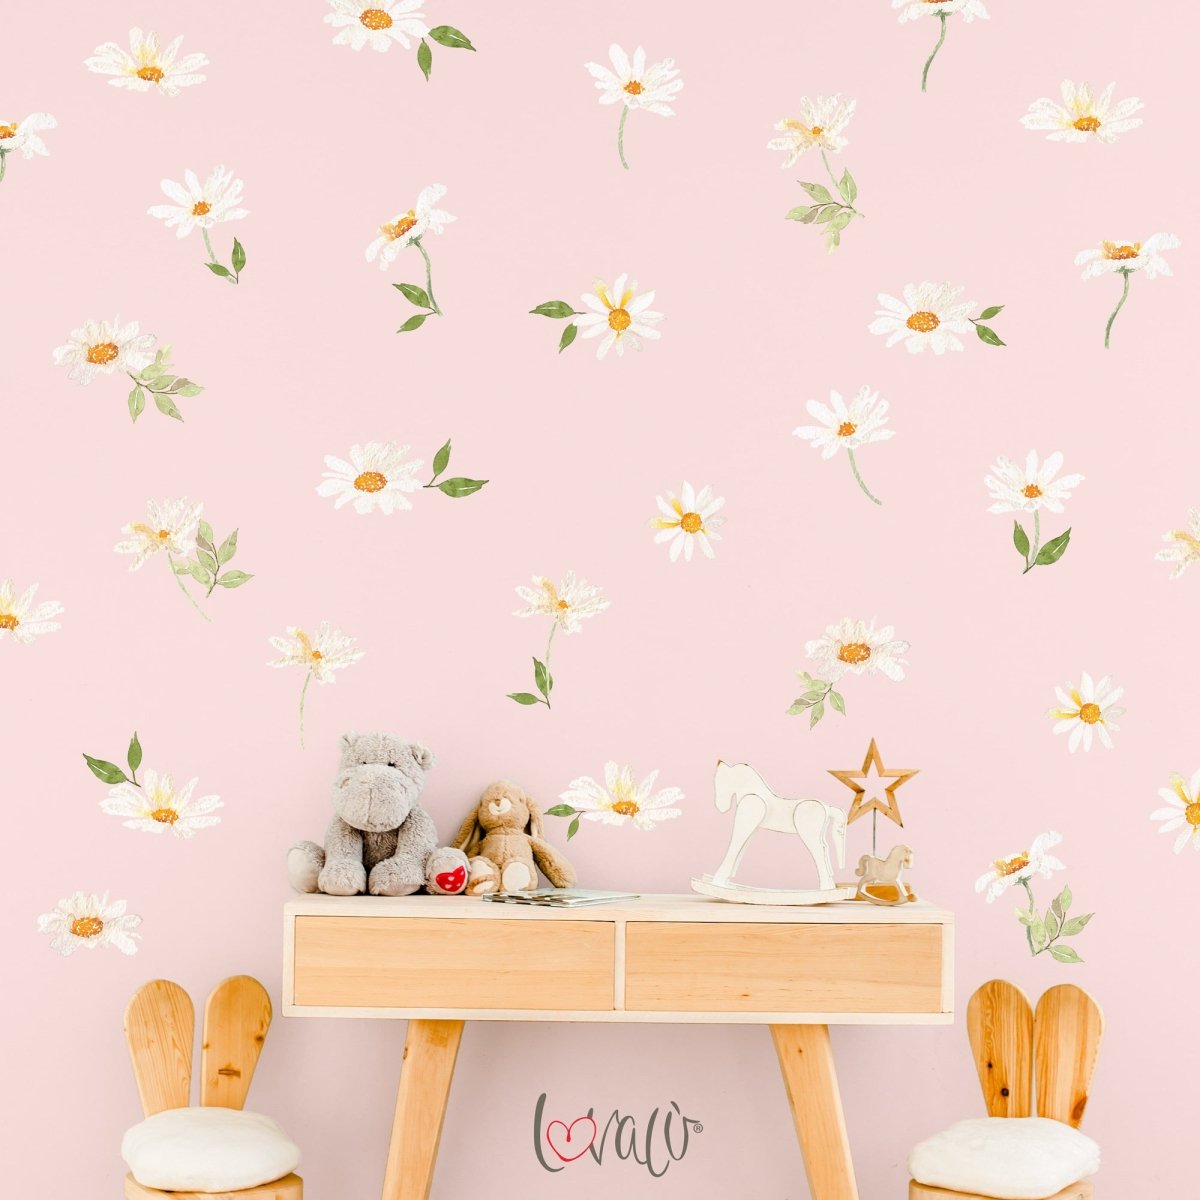 Watercolor Daisy Wall Decals - Lovalù